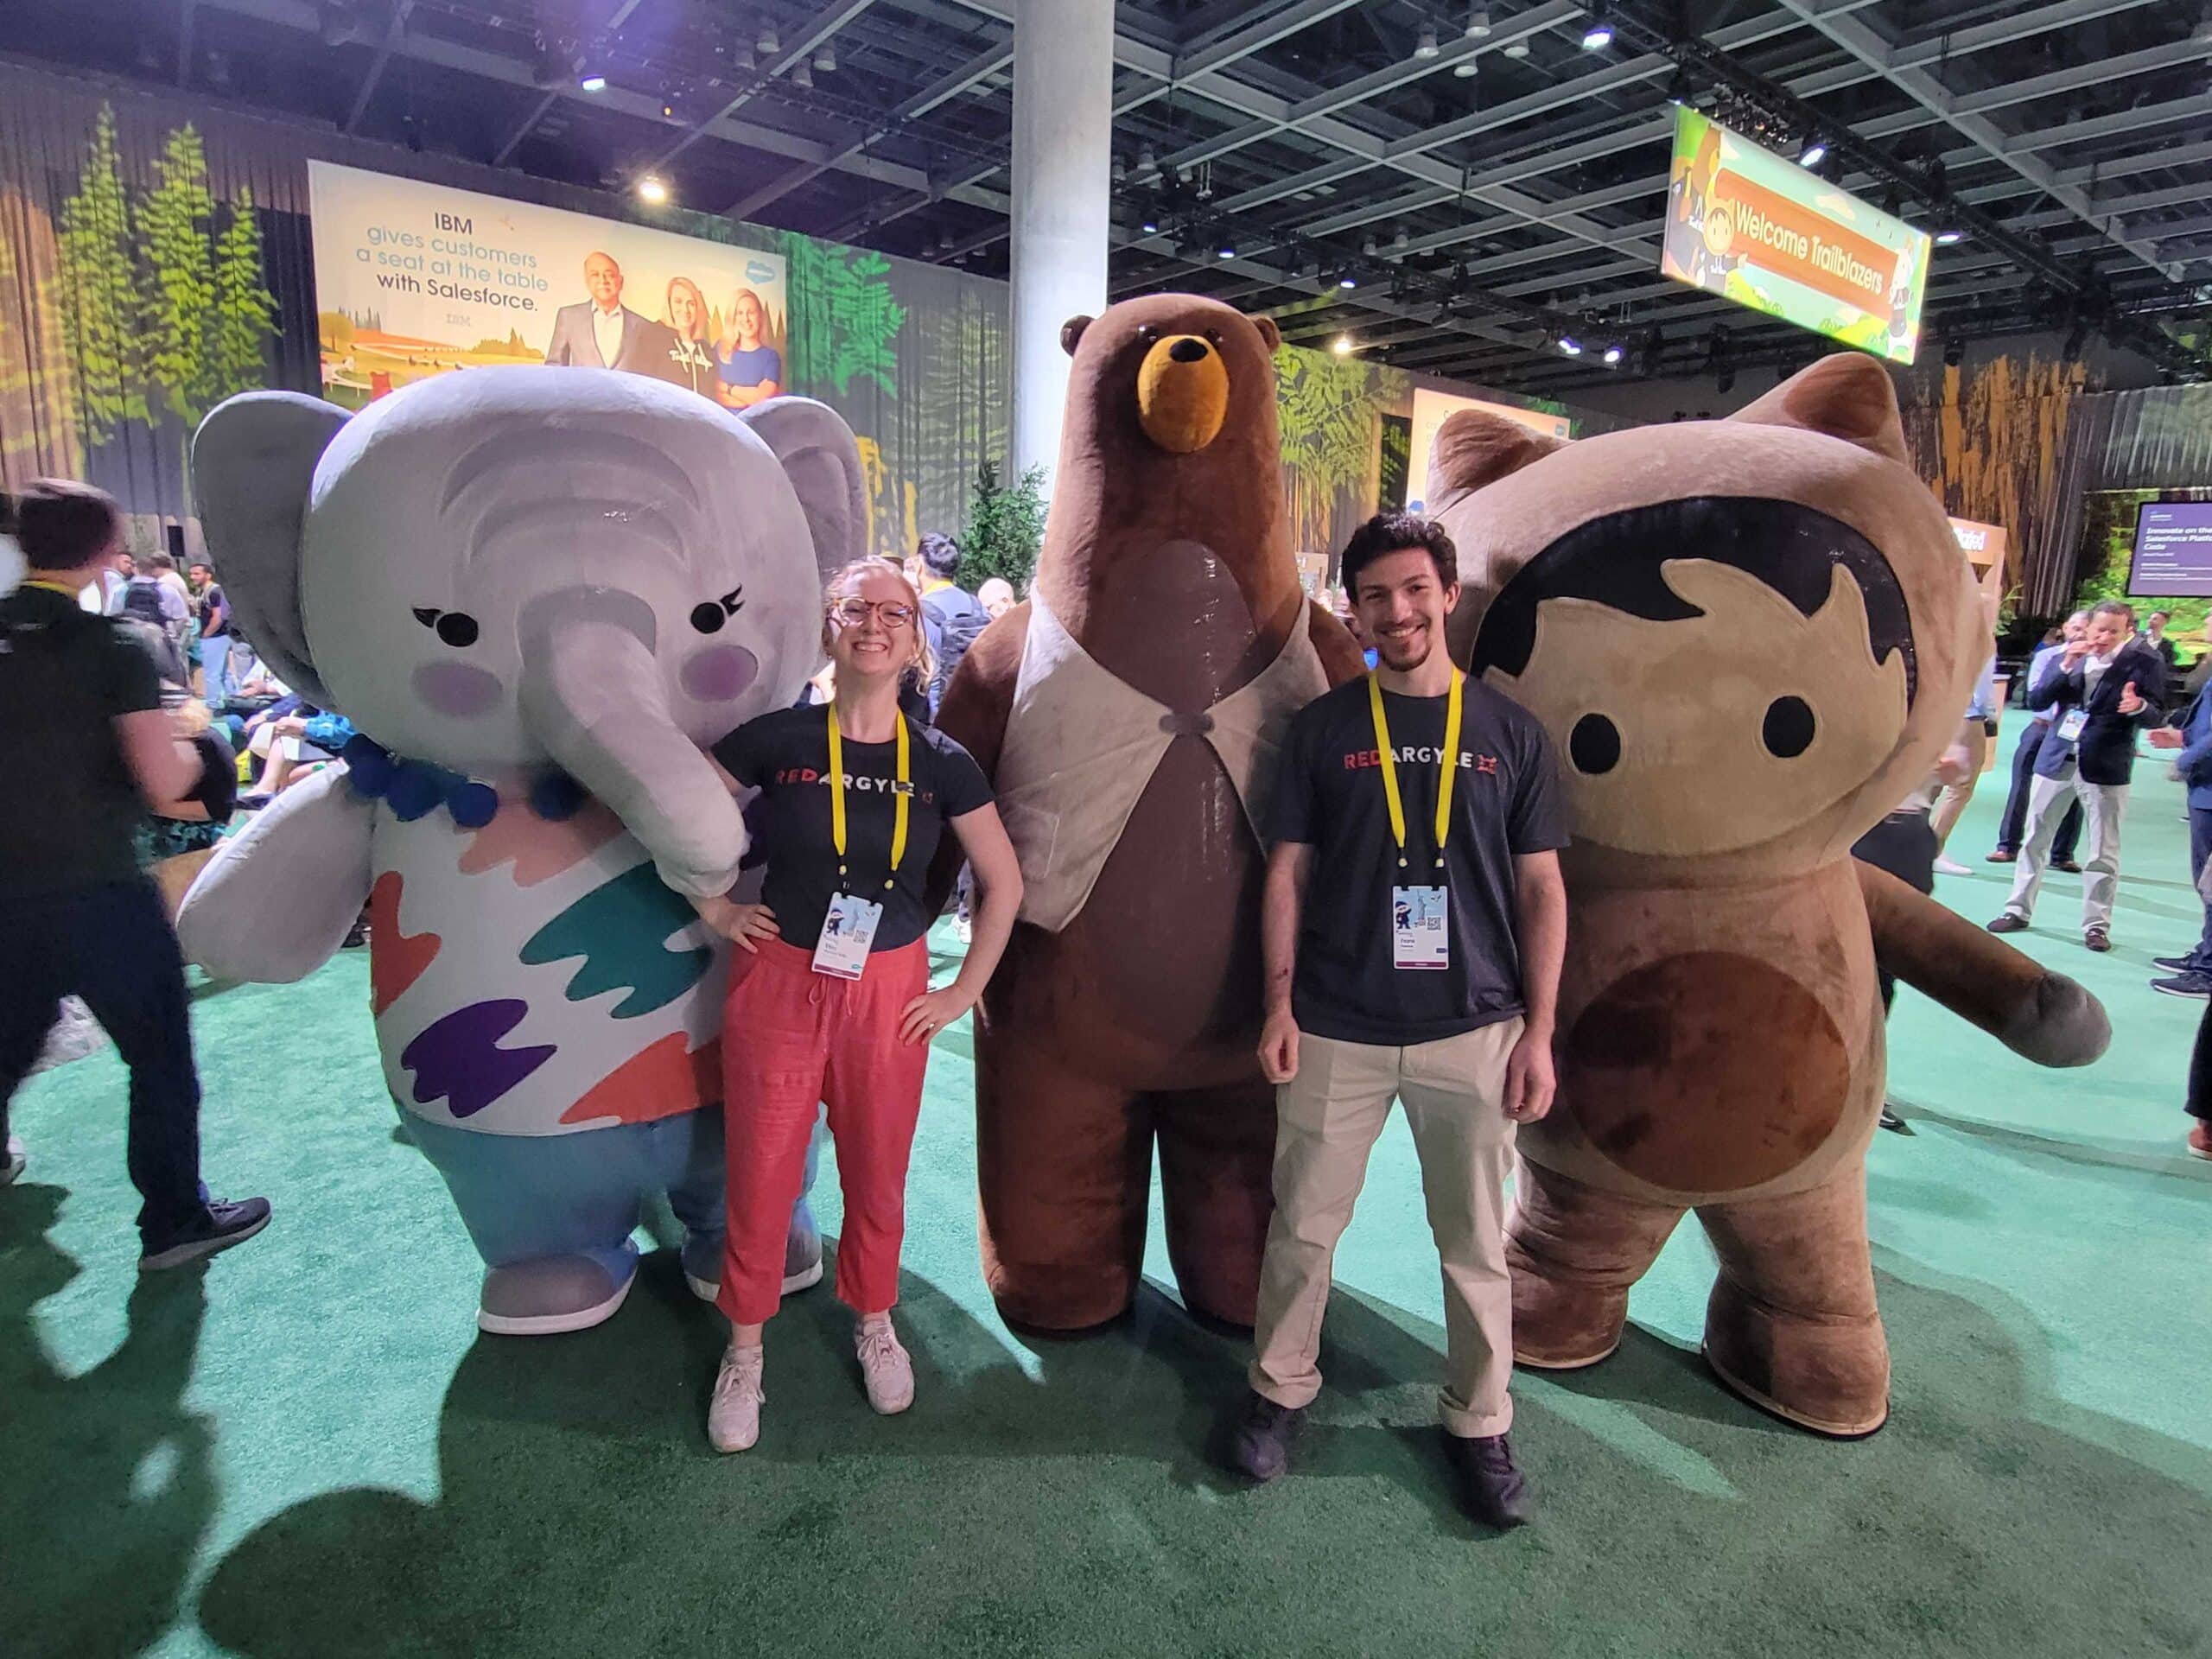 Argylers Eliza and Frank with Salesforce mascots at Salesforce event